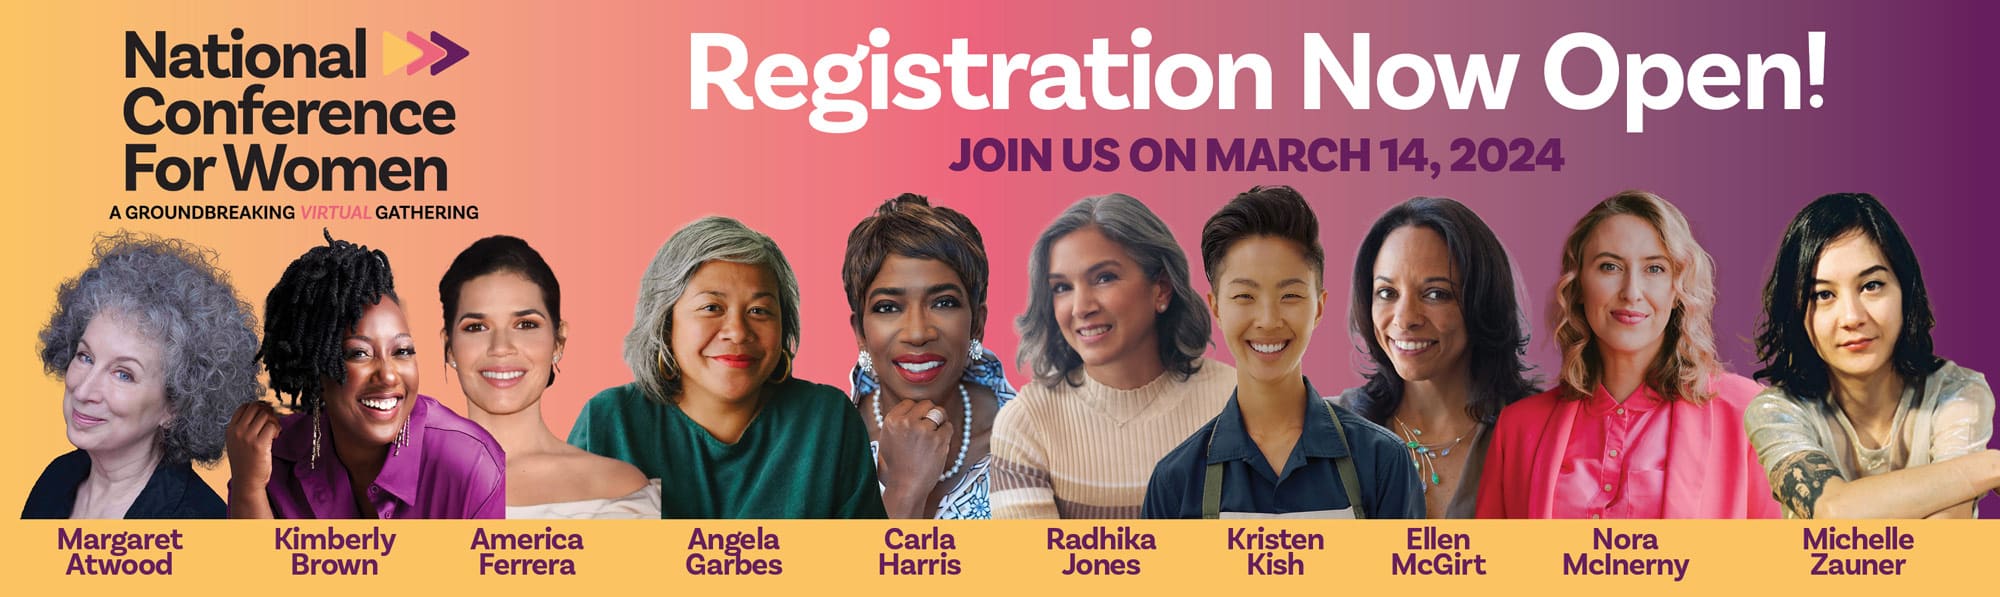 National Conference for Women: Registration Now Open! Join us March 14th online!